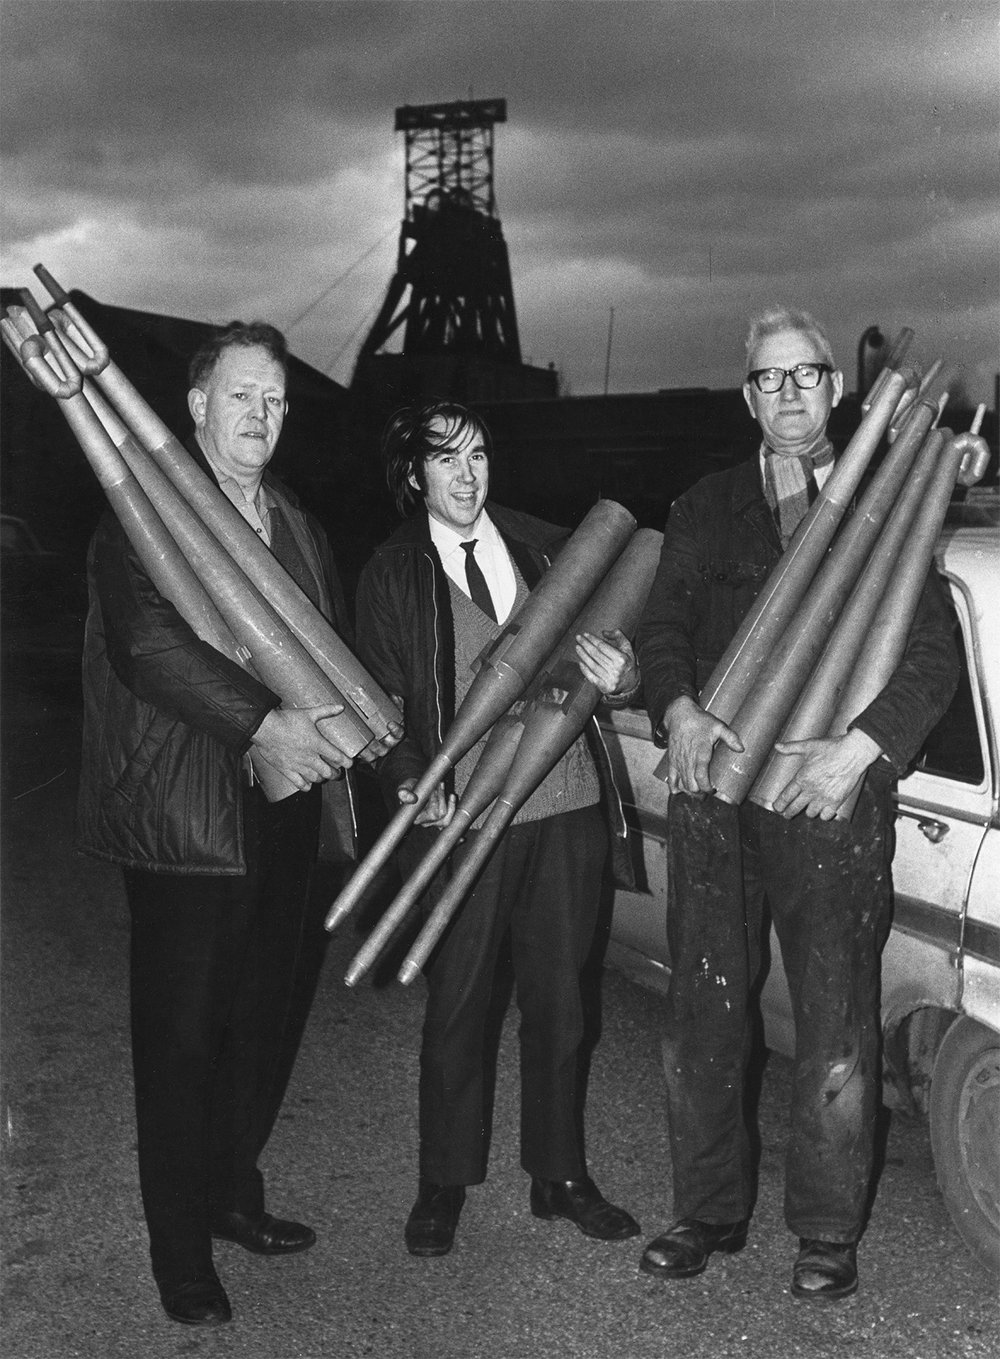 Founding members of the Harworth Christie Organ Enthusiasts carrying organ pipes in the colliery yard, Harworth Colliery, Nottinghamshire.